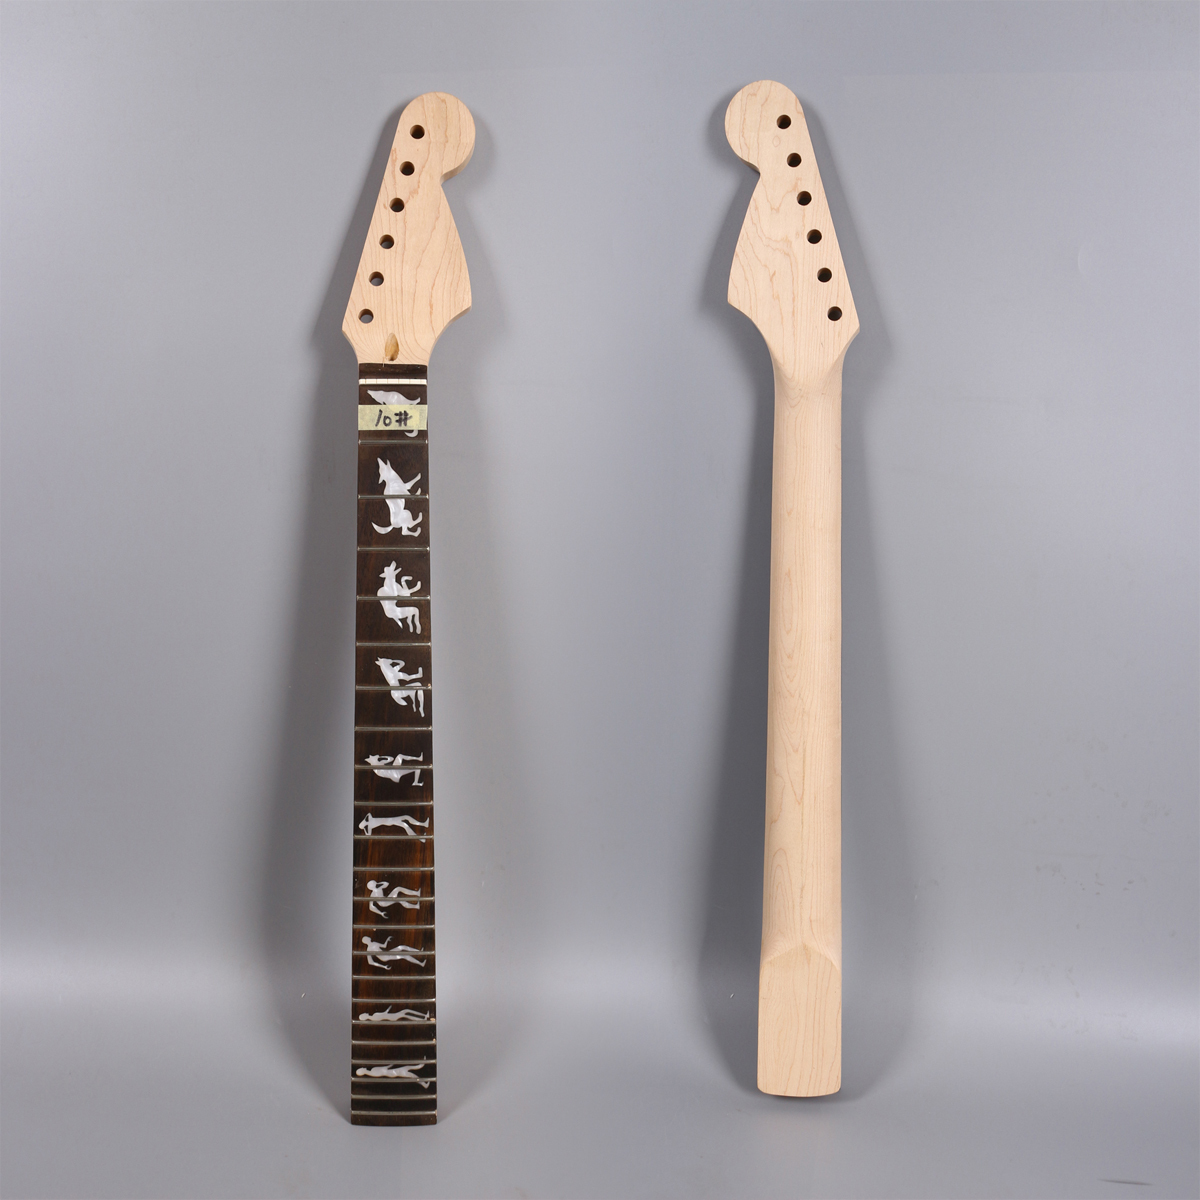  New Guitar Neck 22fret 25.5inch Maple Rosewood Fretboard Man Wolf Inlay Bolt on-